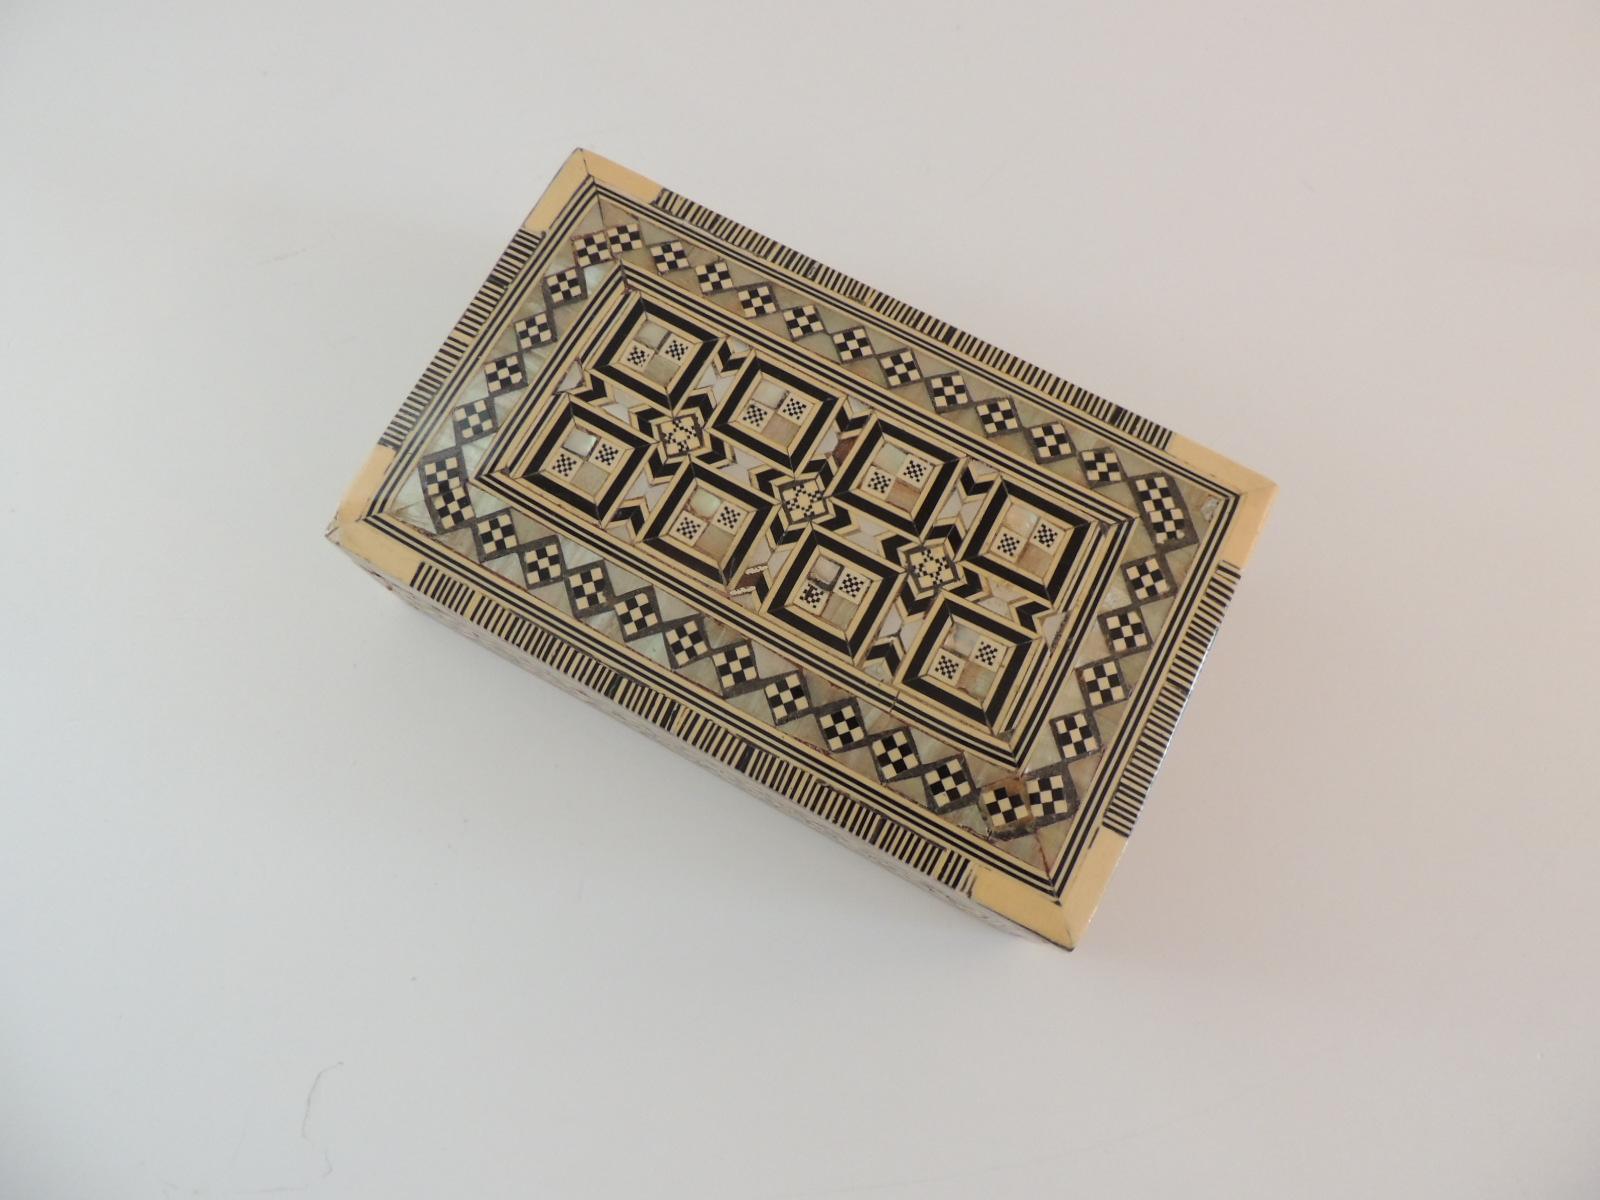 Syrian wood and mother of pearl inlaid jewelry box.
Felt lining.
Size: 8